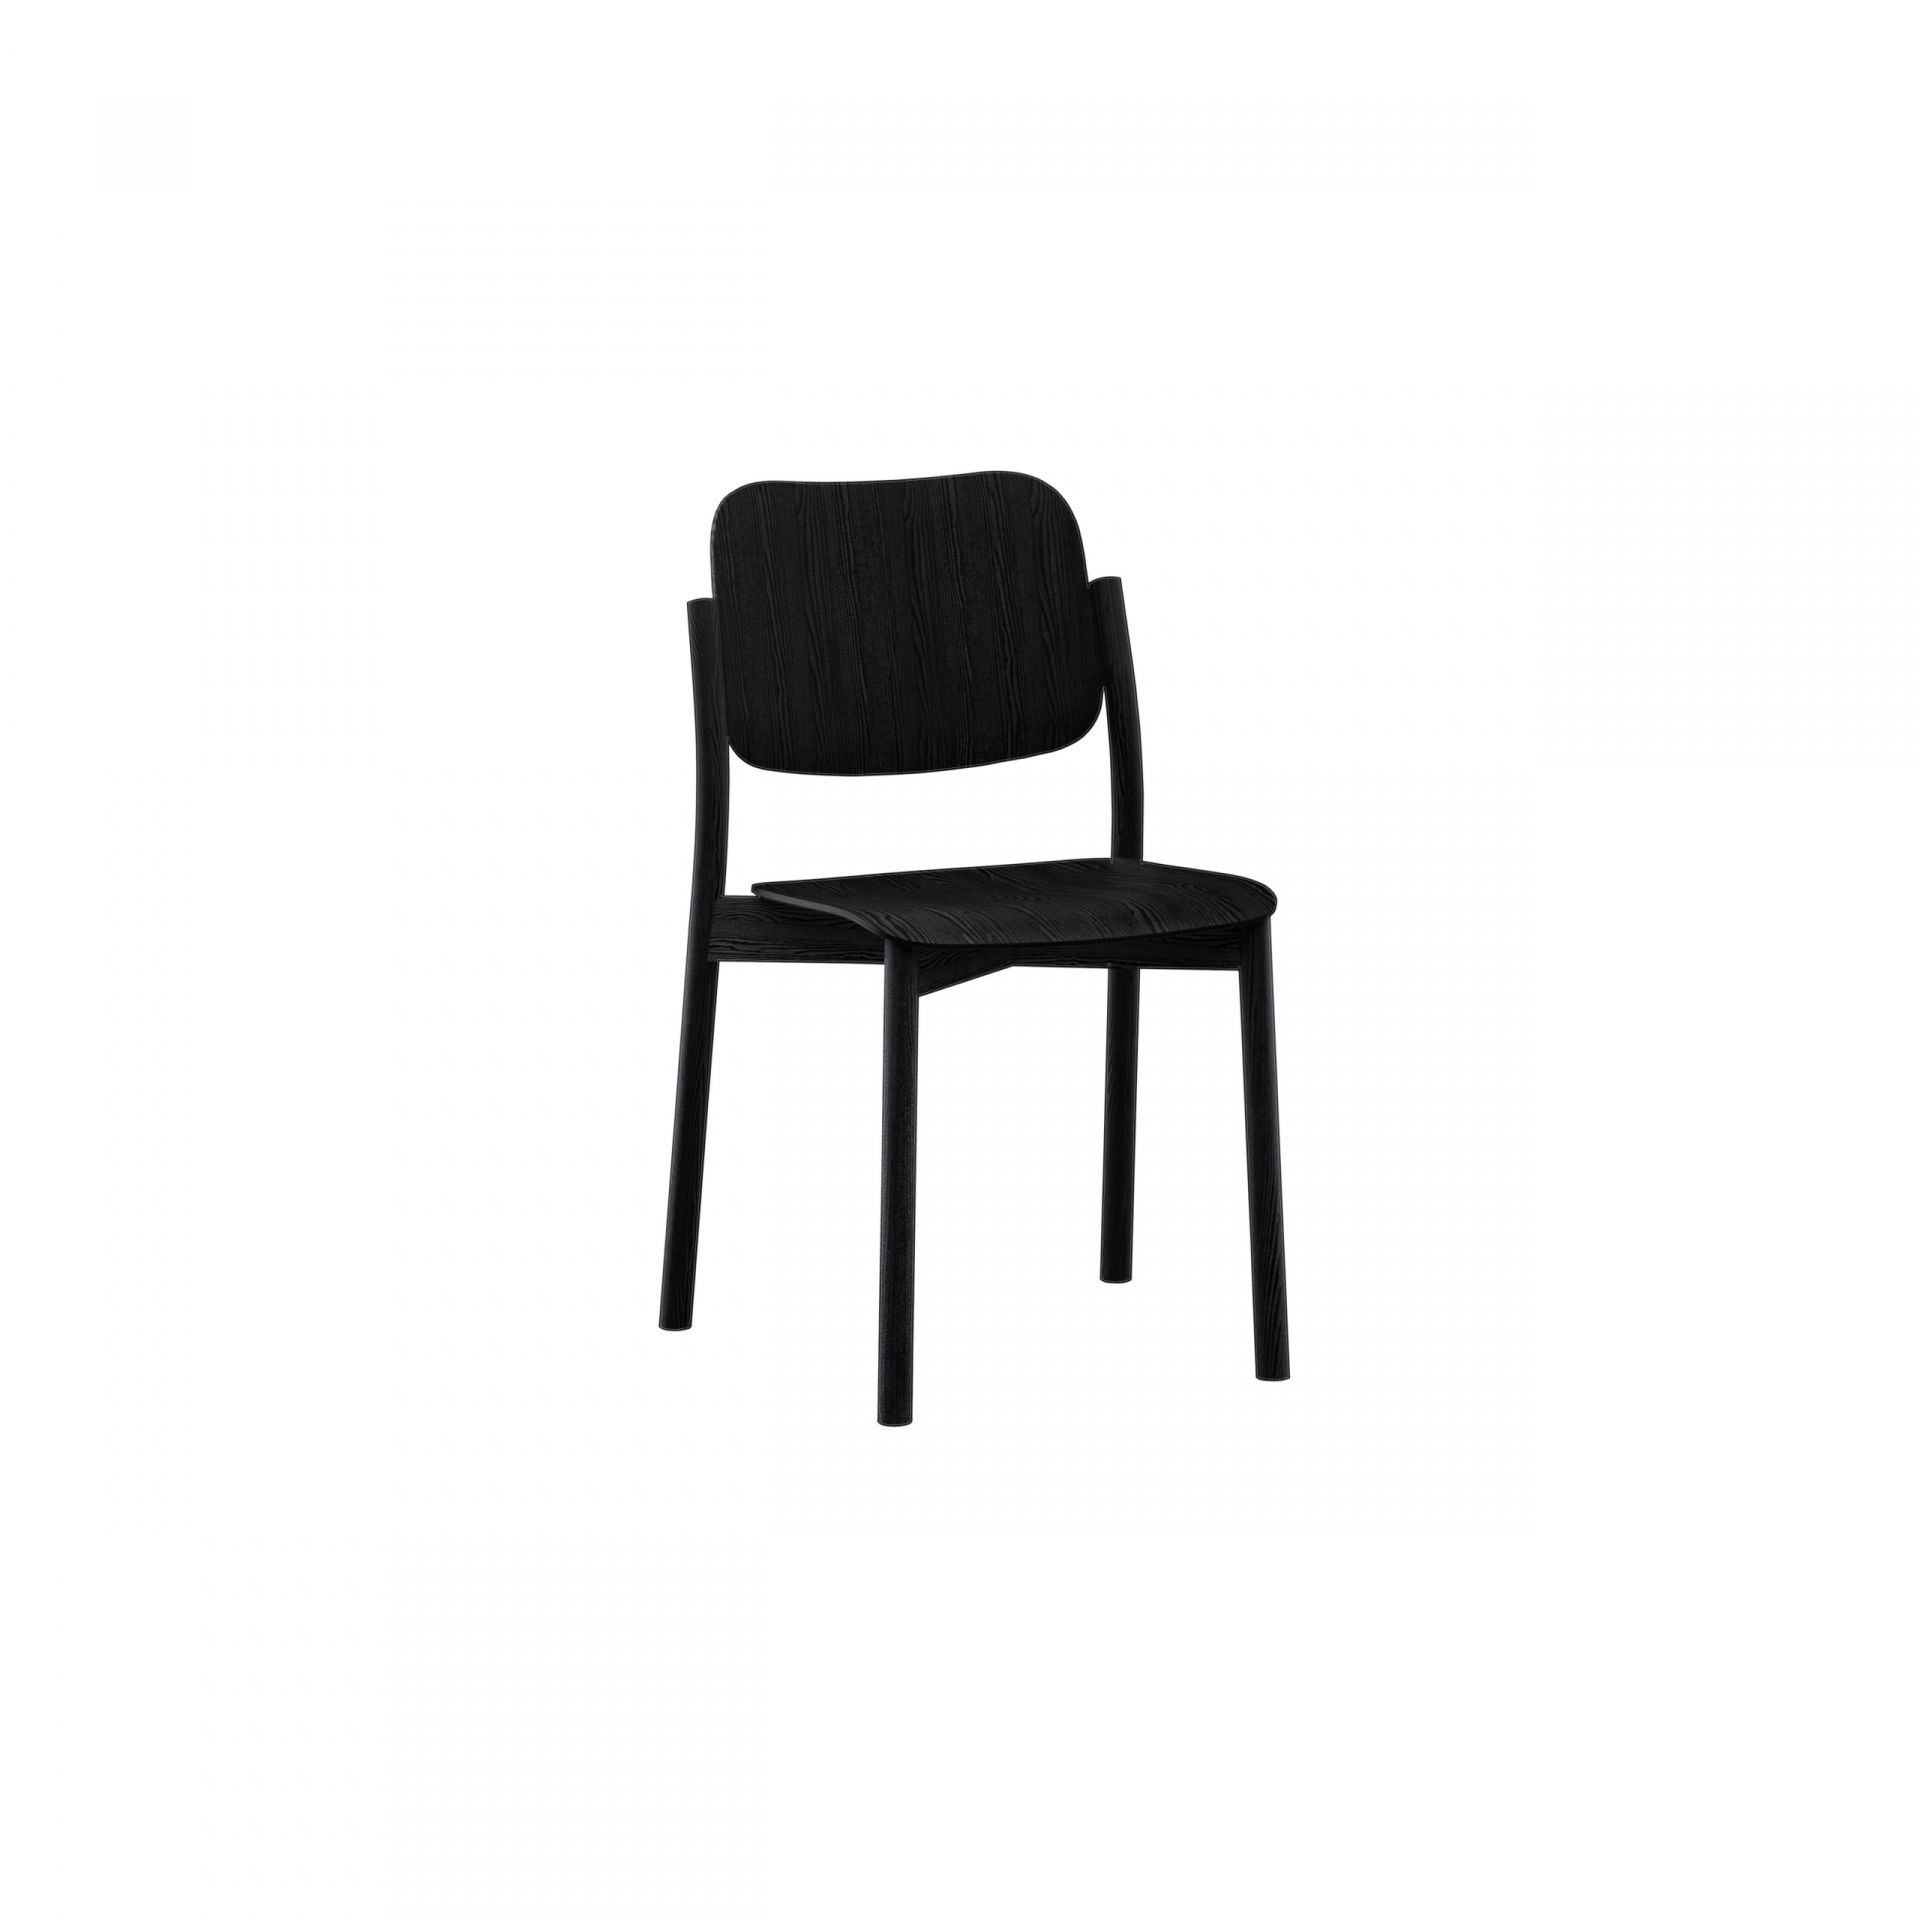 Zoe Wooden chair product image 9